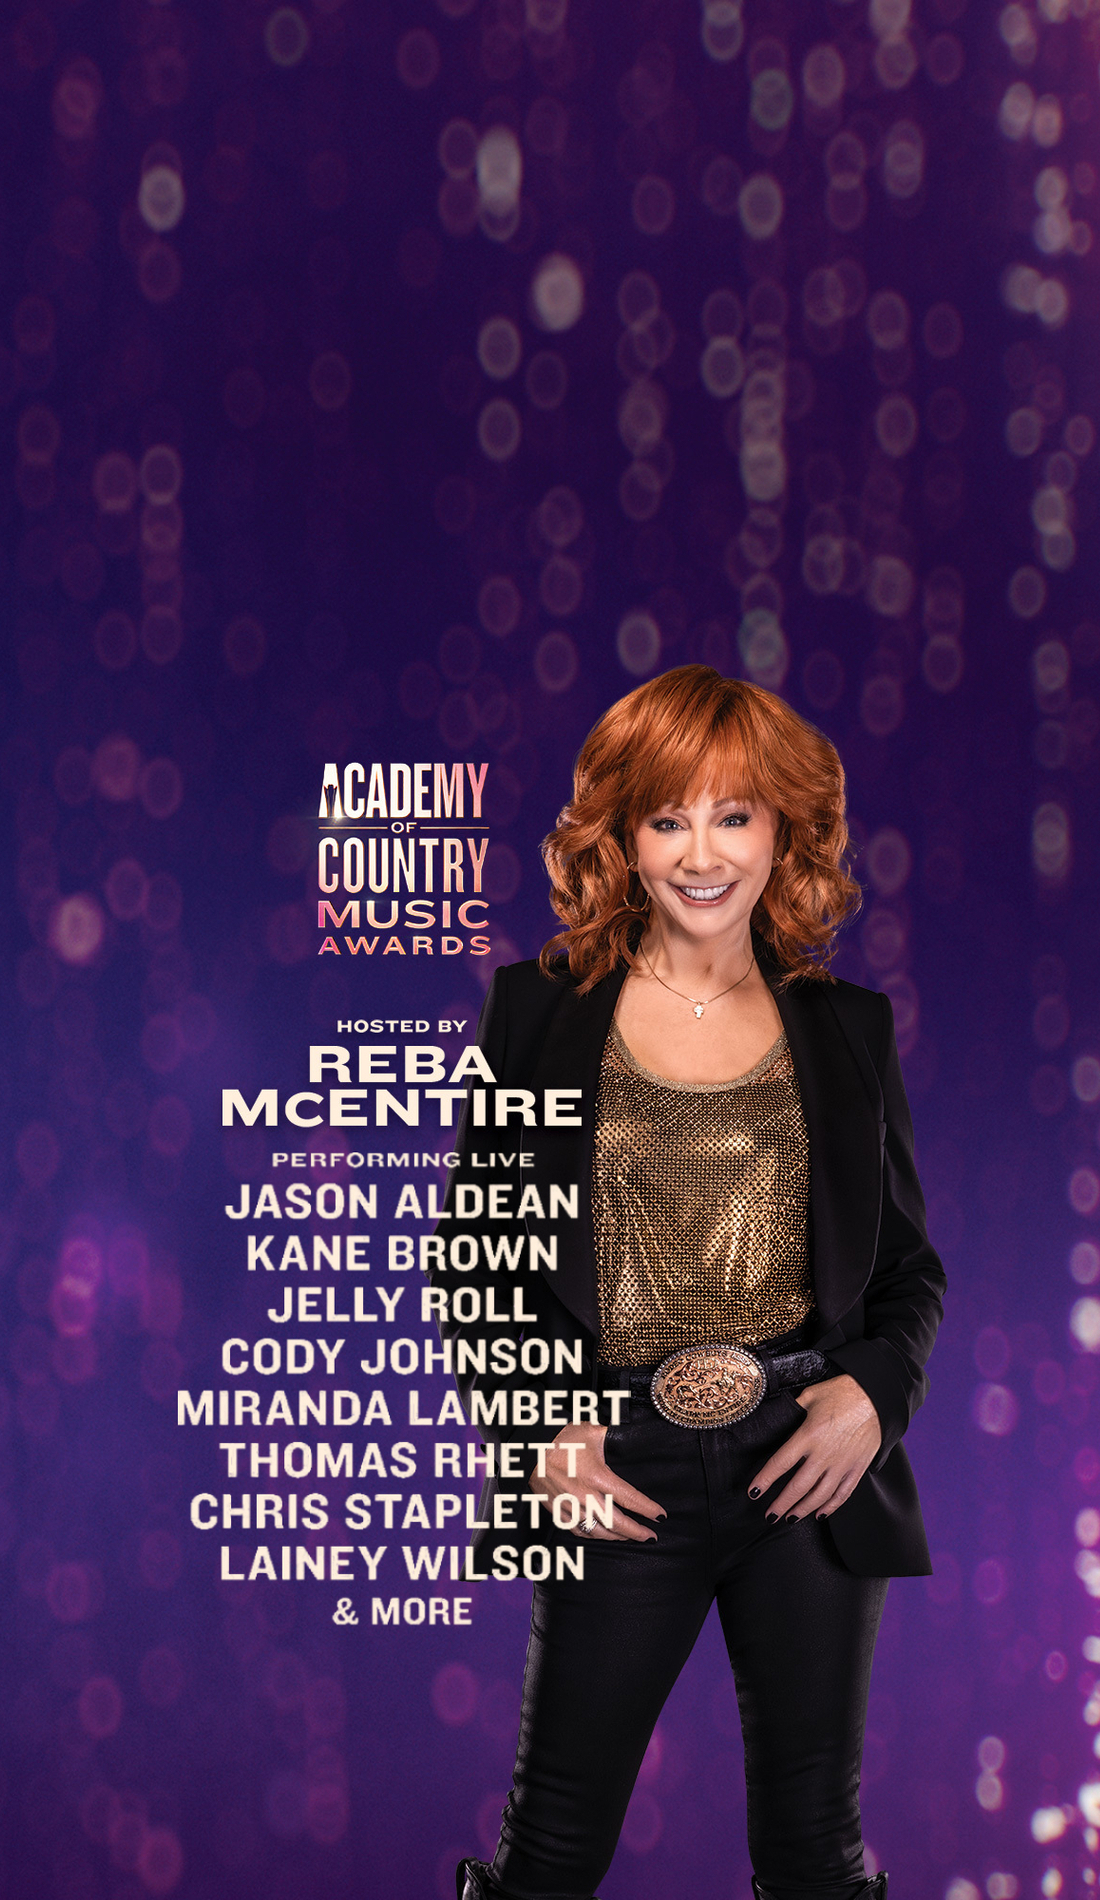 A Academy of Country Music Awards live event